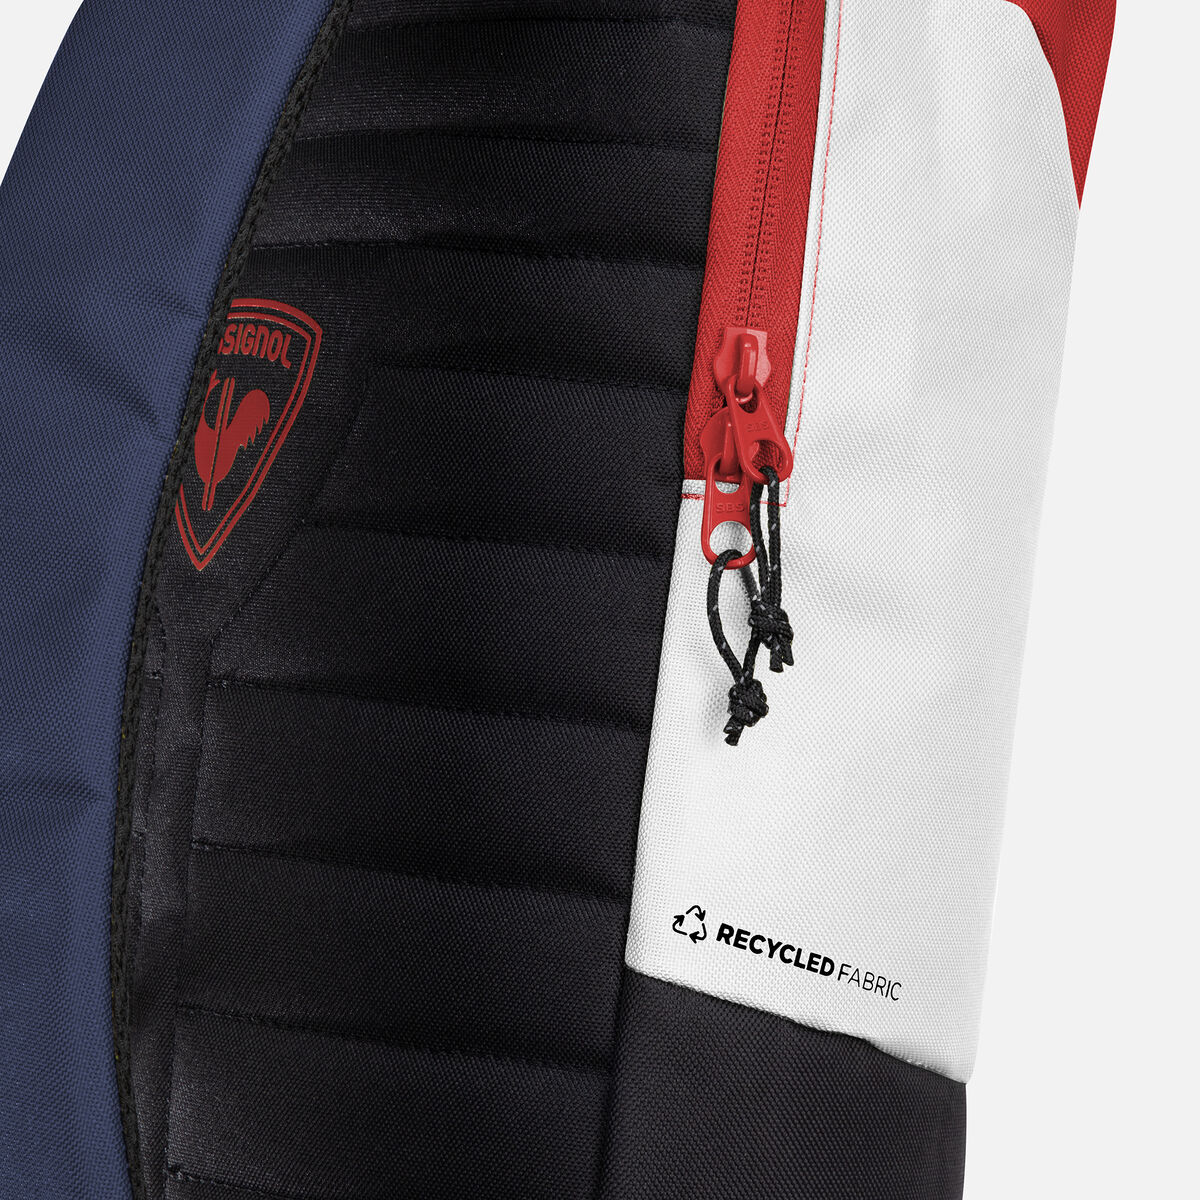 Rossignol Back to the Games 14L Backpack 